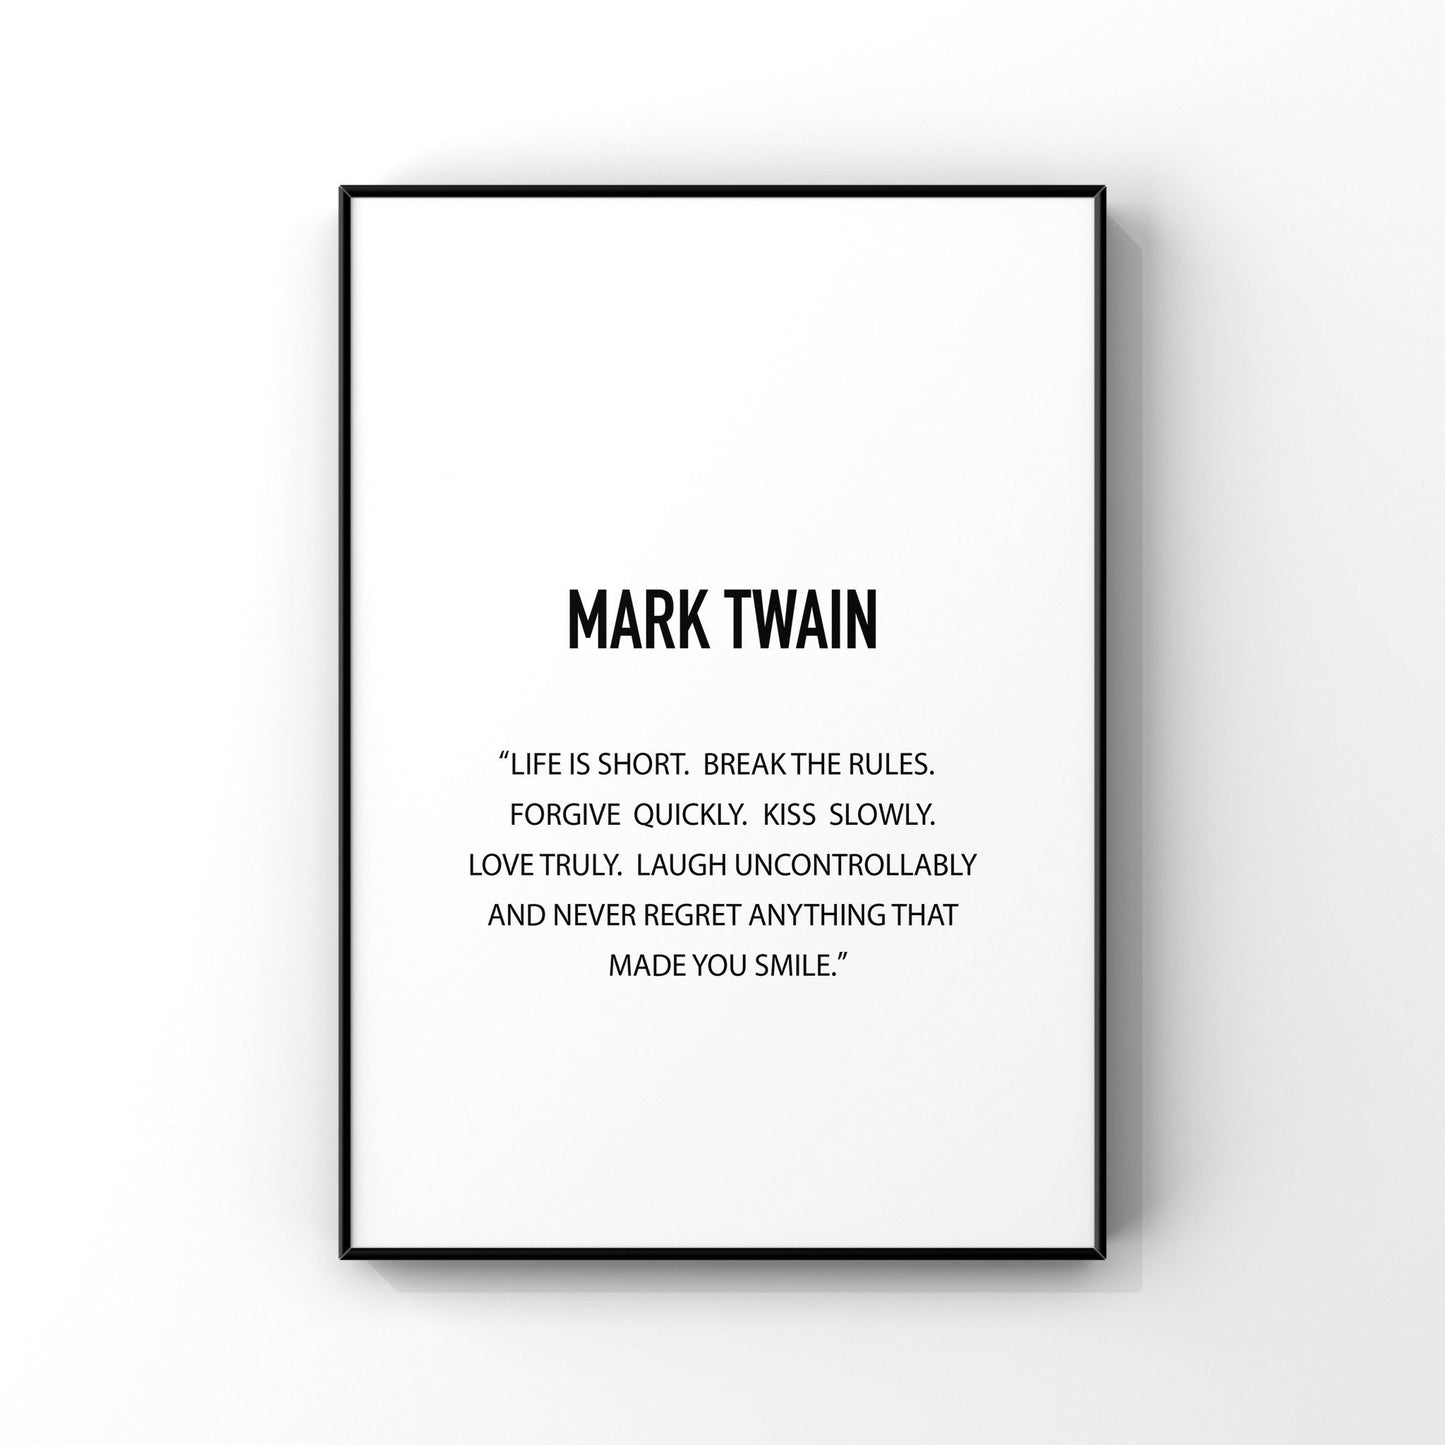 Life is short,Break the rules,Never regret anything that made you smile,Mark Twain quote,Mark Twain print,Inspirational print,Motivational